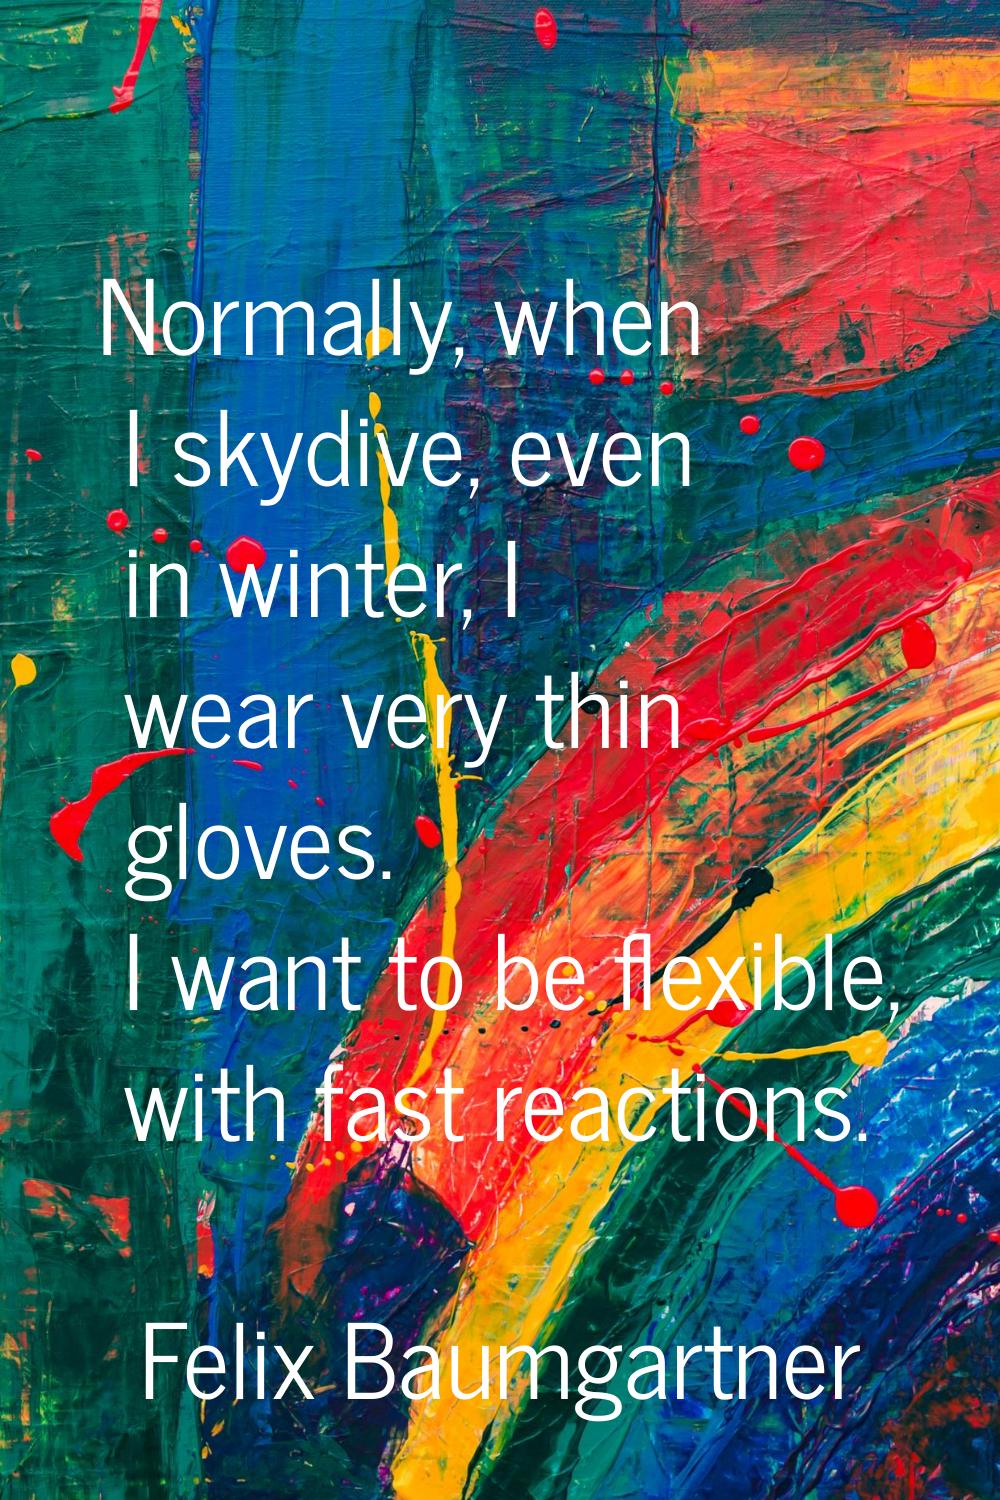 Normally, when I skydive, even in winter, I wear very thin gloves. I want to be flexible, with fast